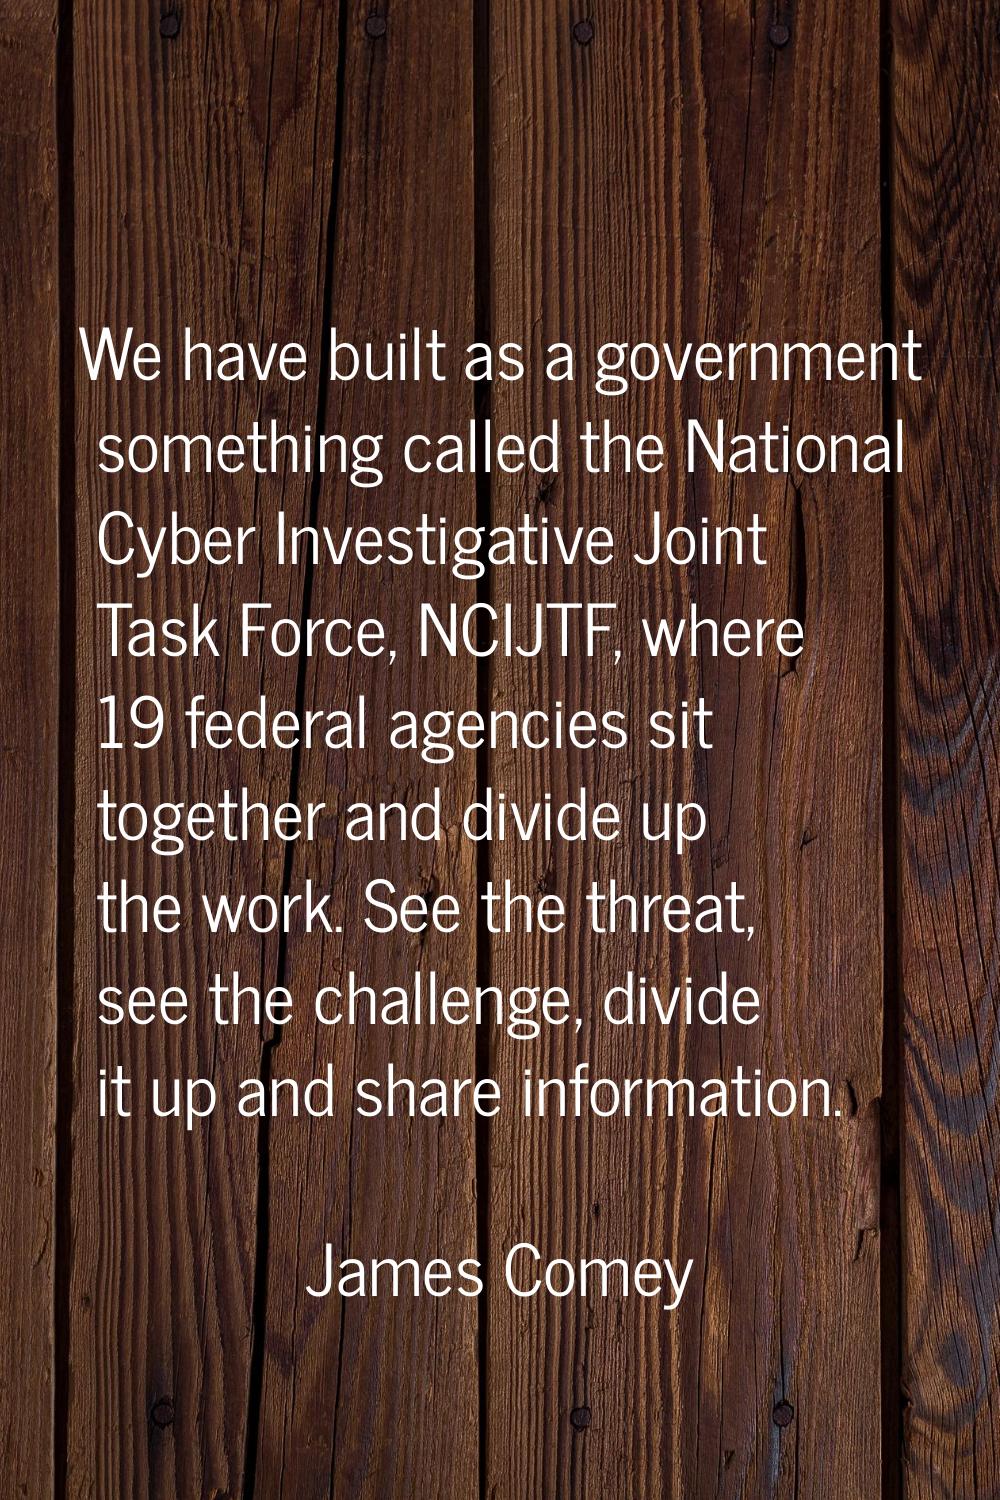 We have built as a government something called the National Cyber Investigative Joint Task Force, N